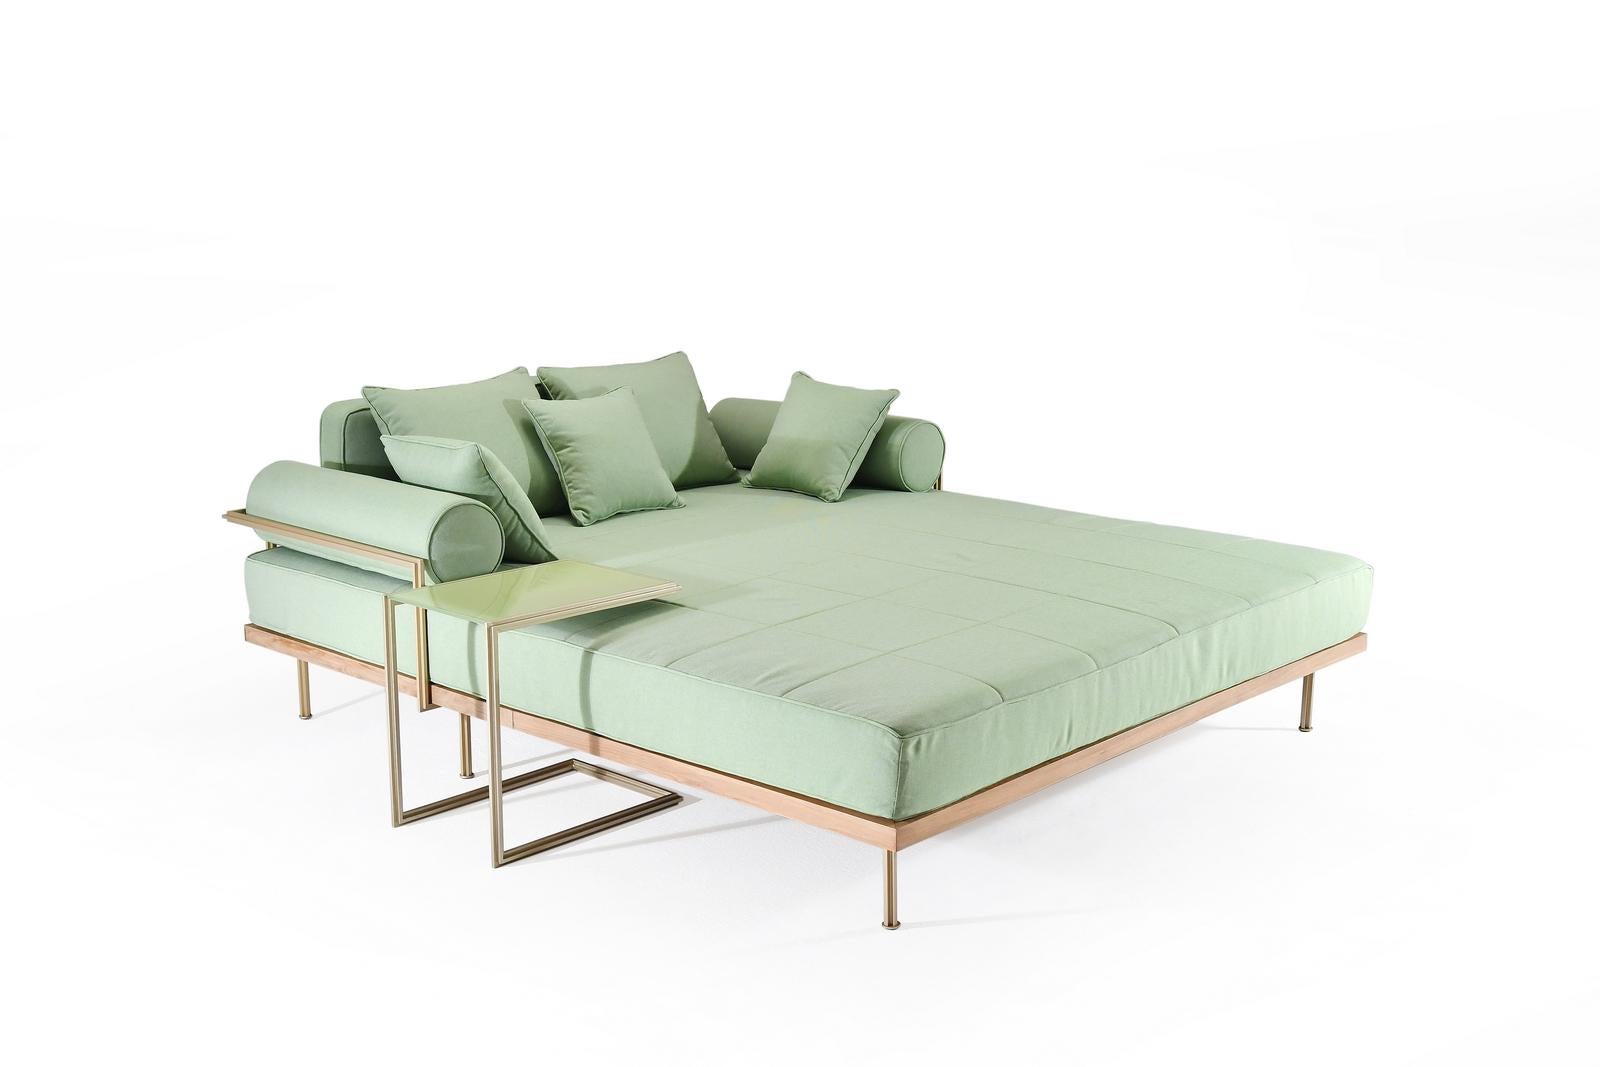 Fabric Bespoke Outdoor Lounge Bed in Brass & Bleached Hardwood Frame, by P. Tendercool For Sale